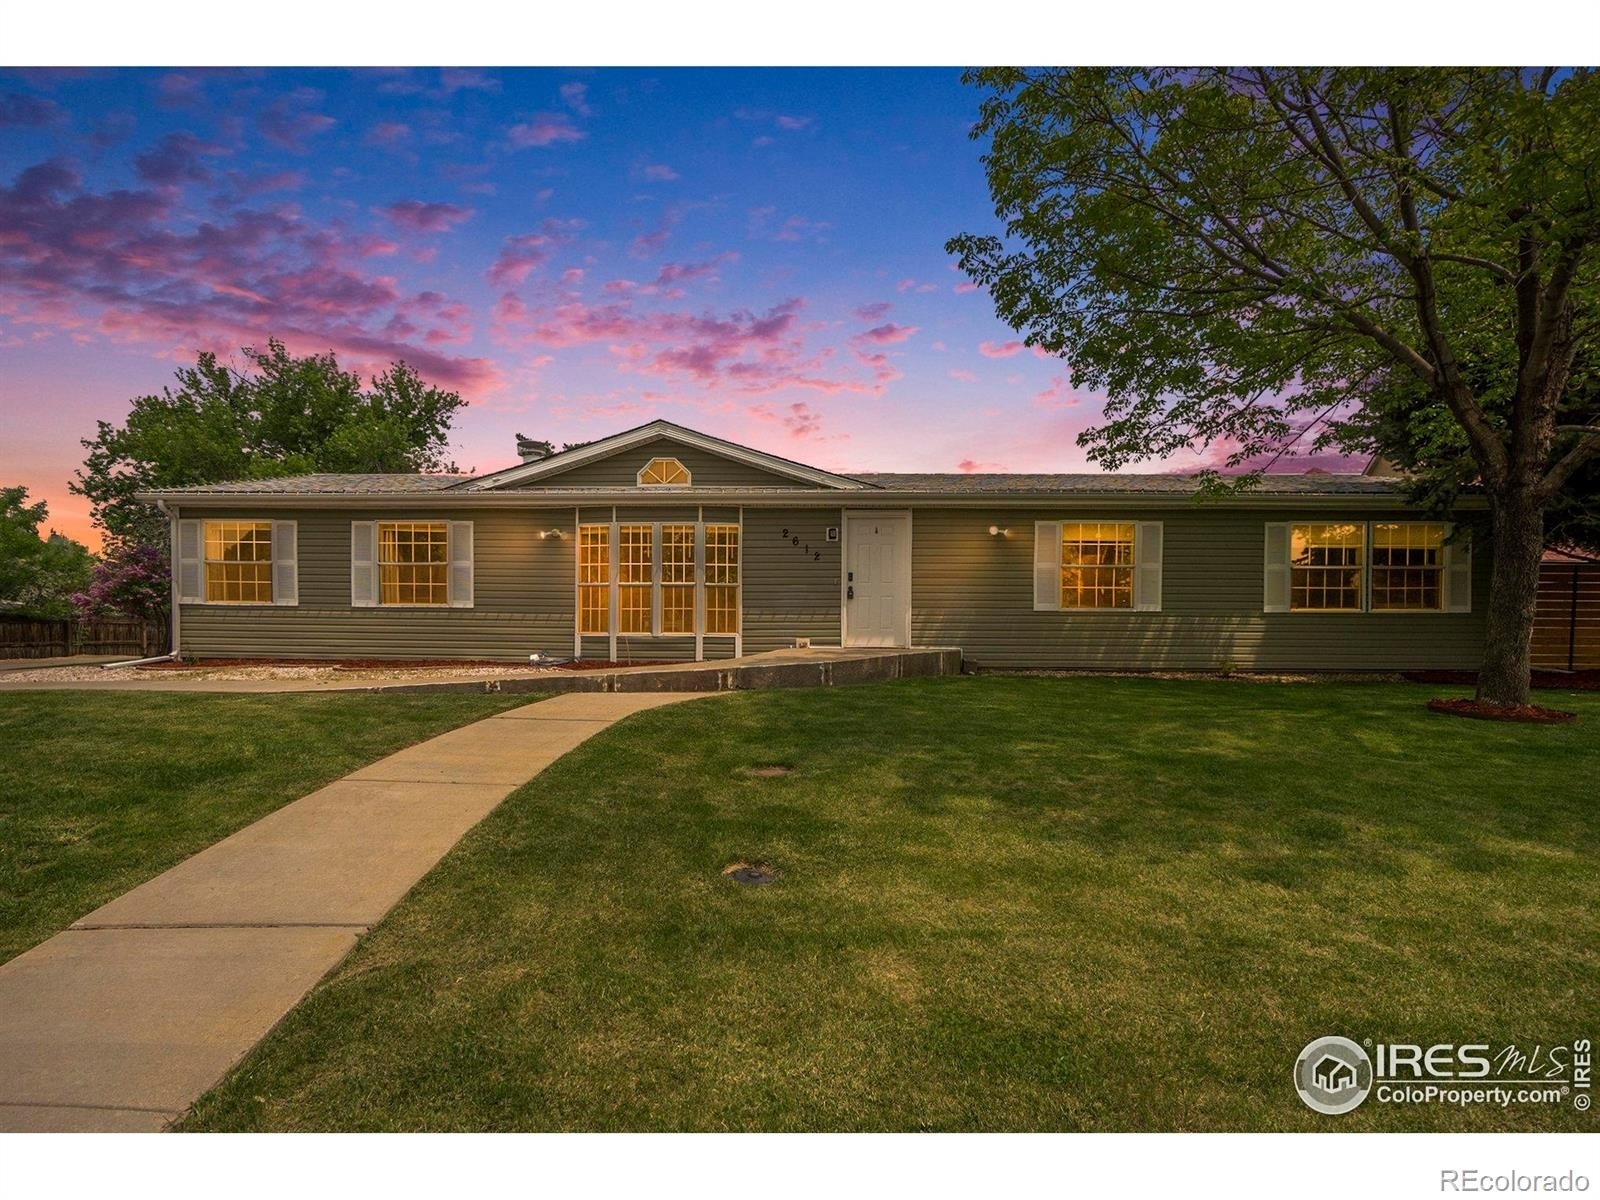 2612 52nd Ave ct Greeley, CO 80634